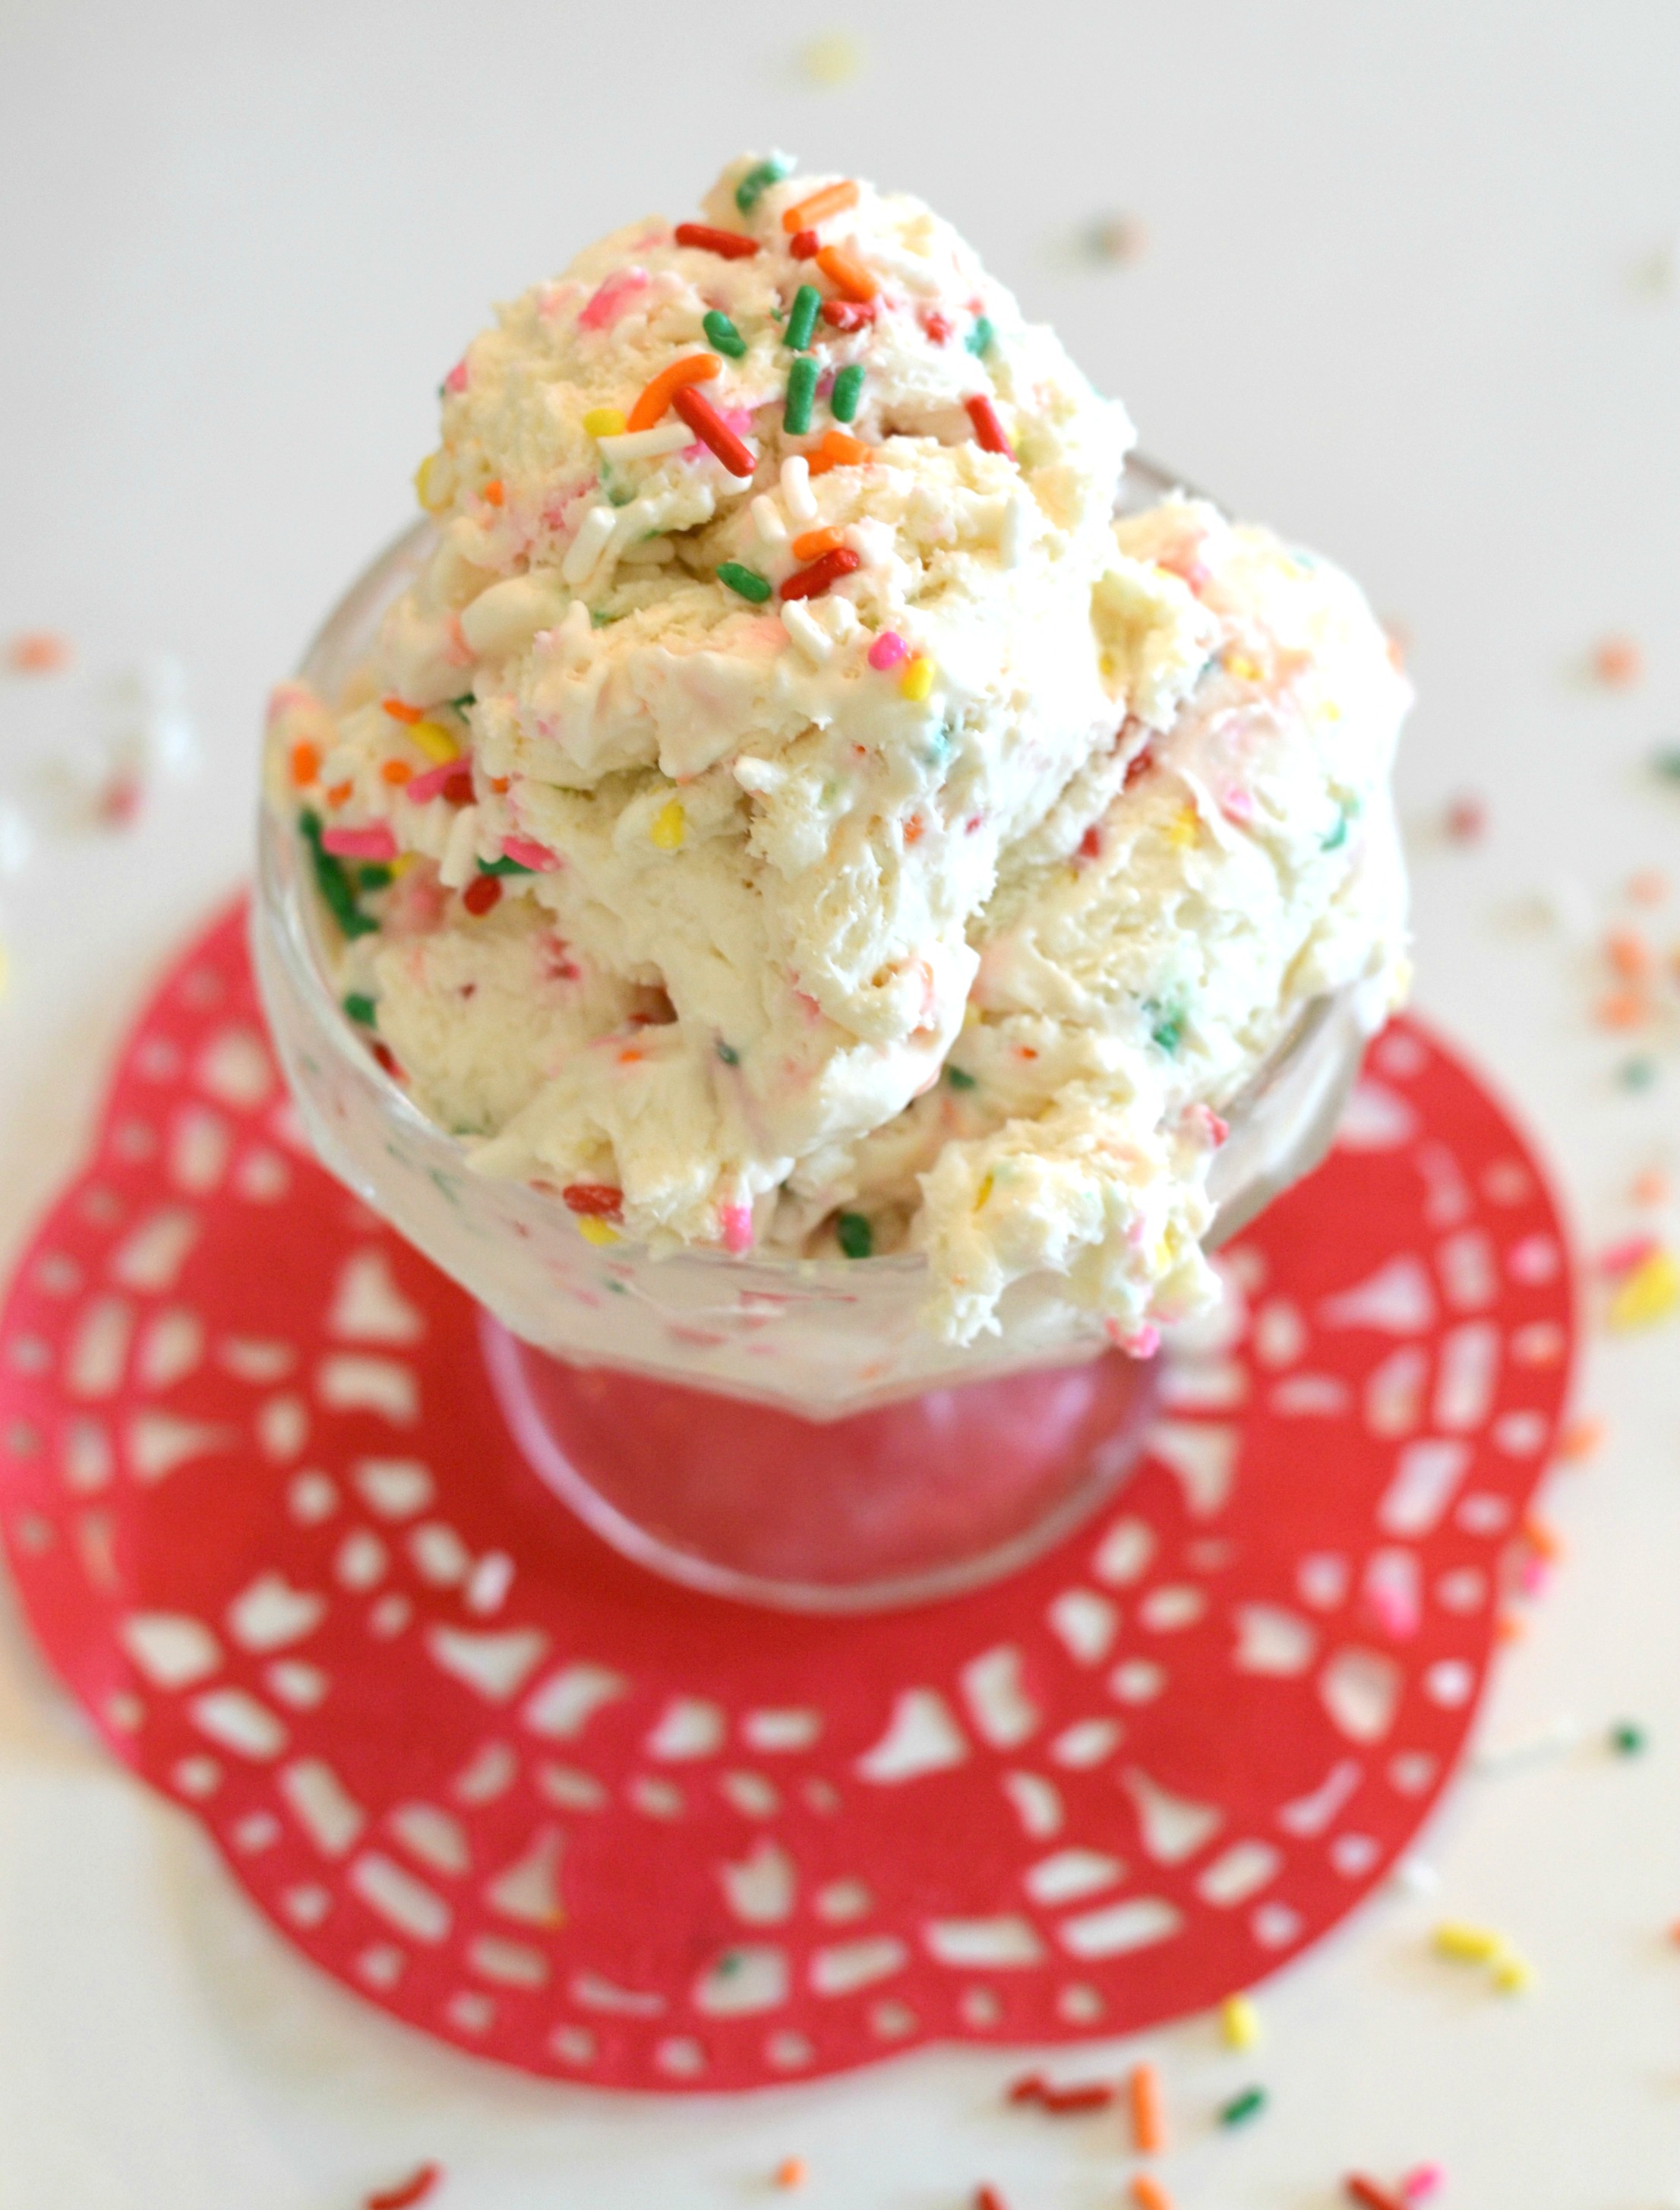 Cake Batter Ice Cream with Sprinkles